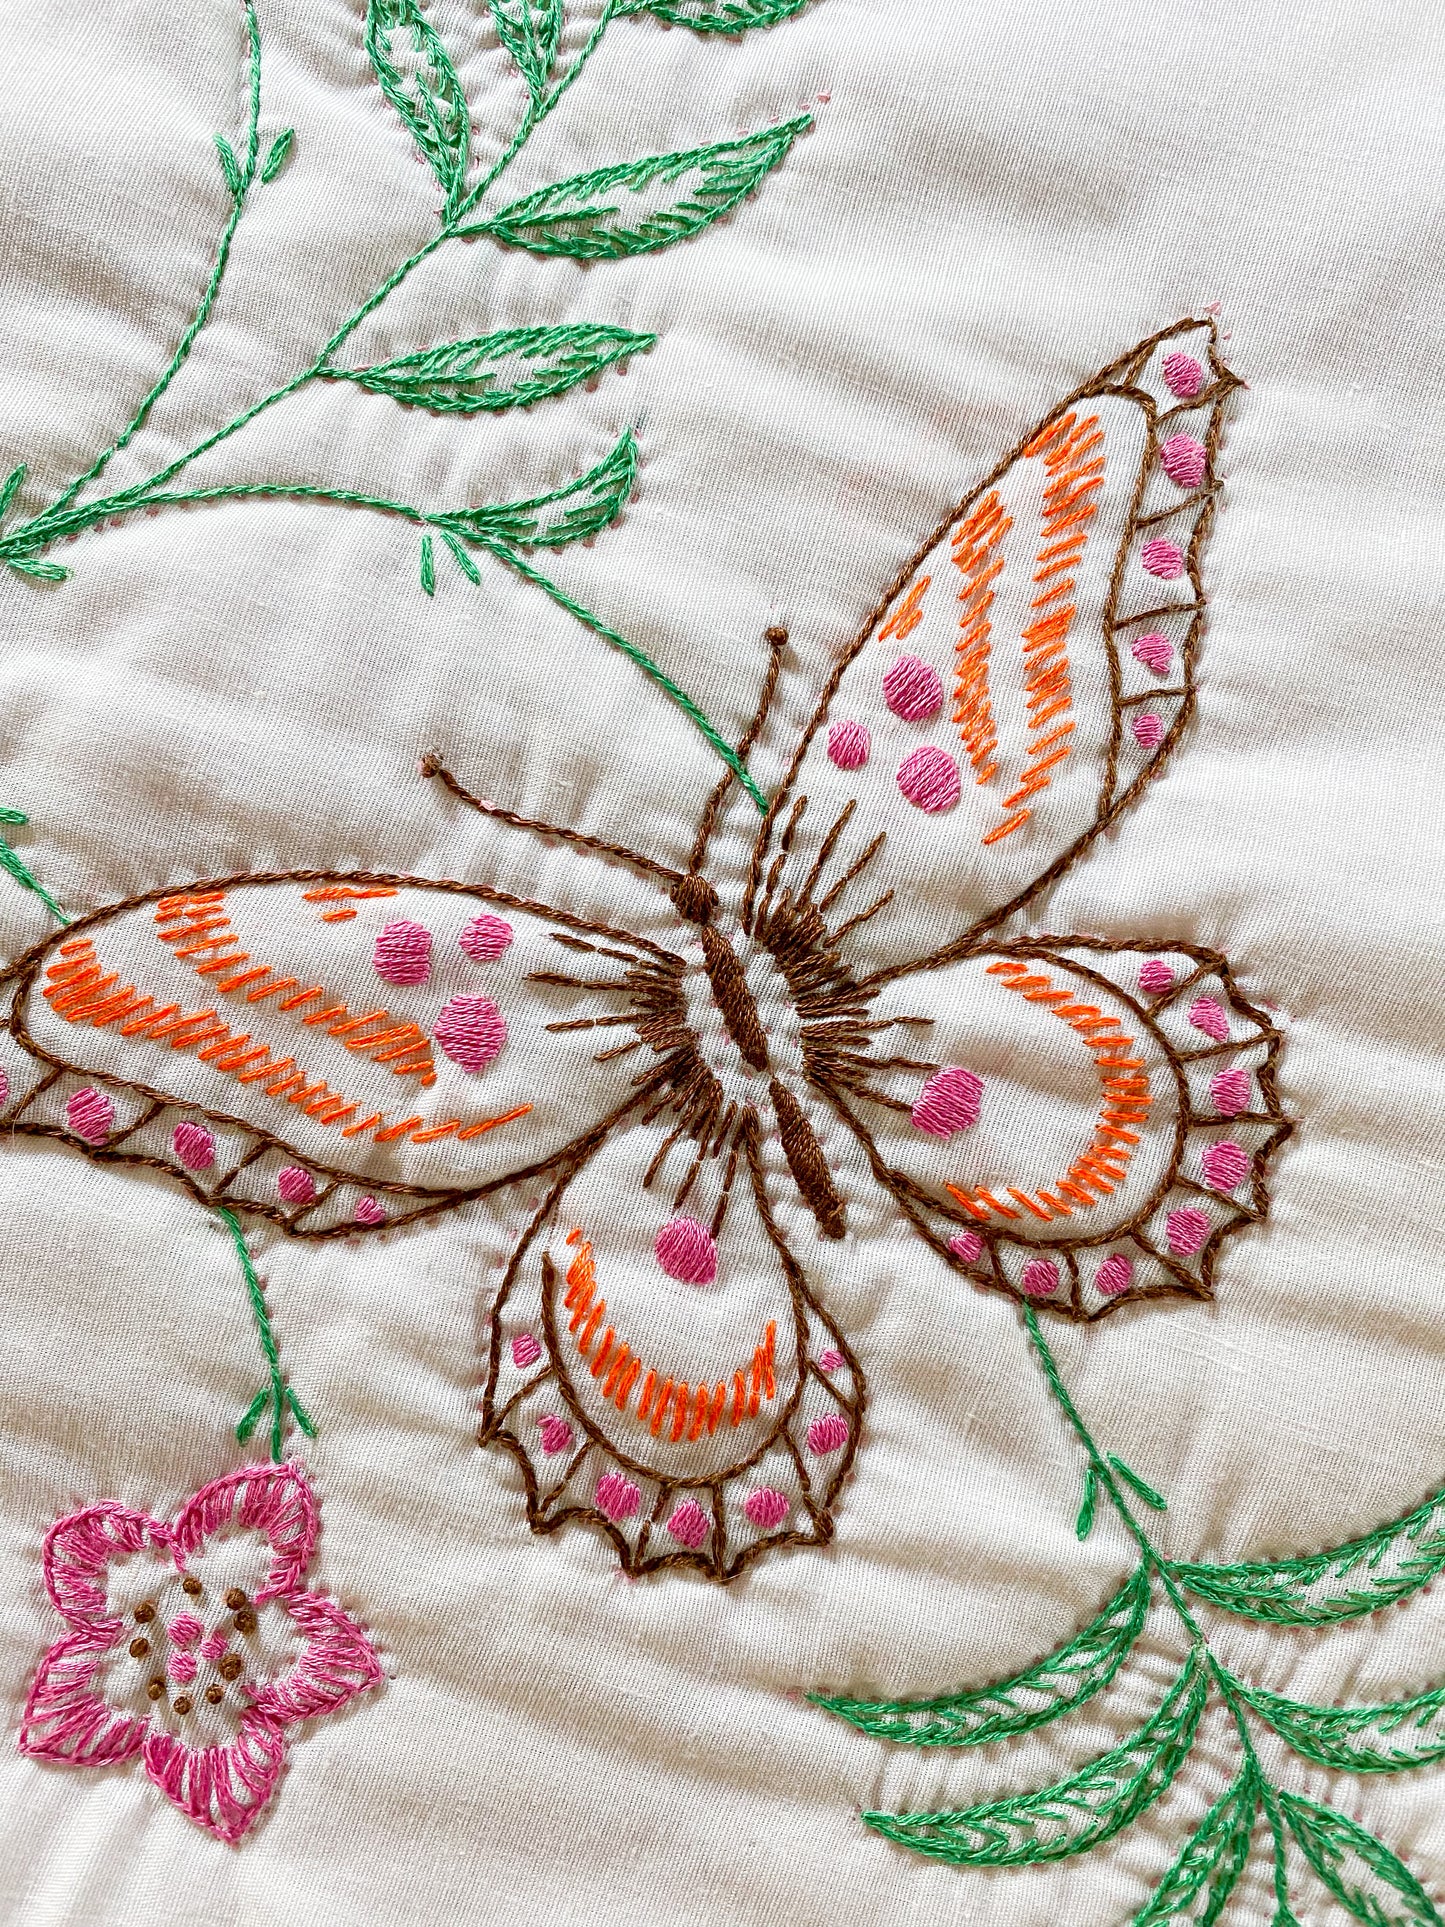 Vintage Pink and White Embroidered Queen Quilt | Butterflies and Flowers Blanket